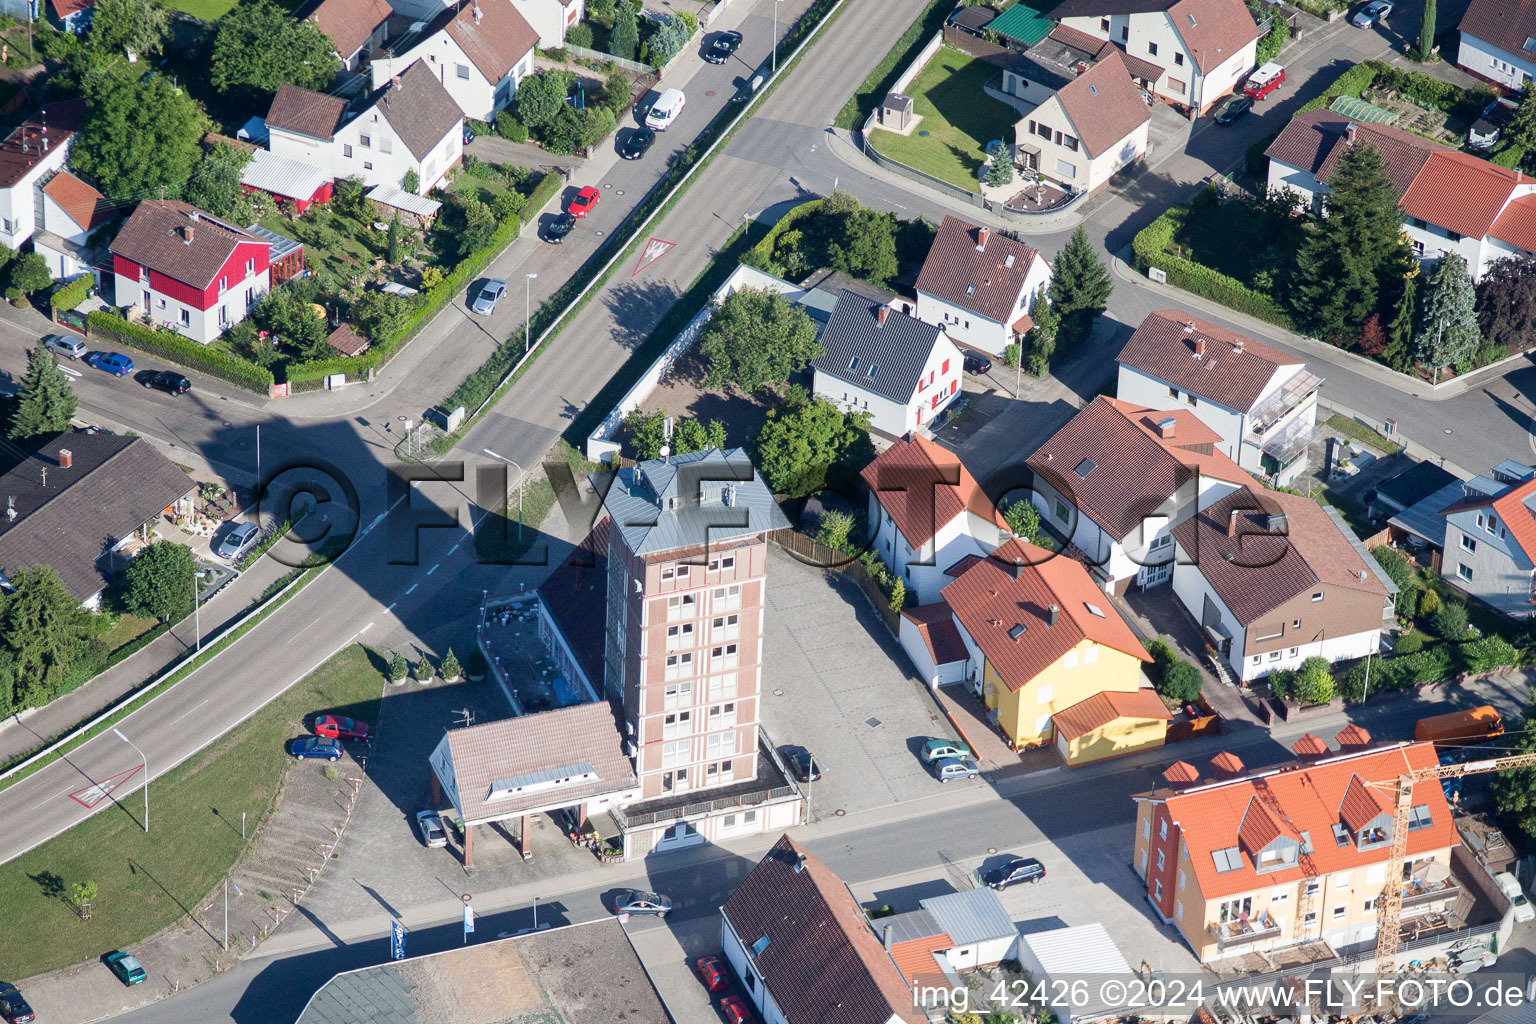 Aerial view of High-rise building Ludovici in Jockgrim in the state Rhineland-Palatinate, Germany